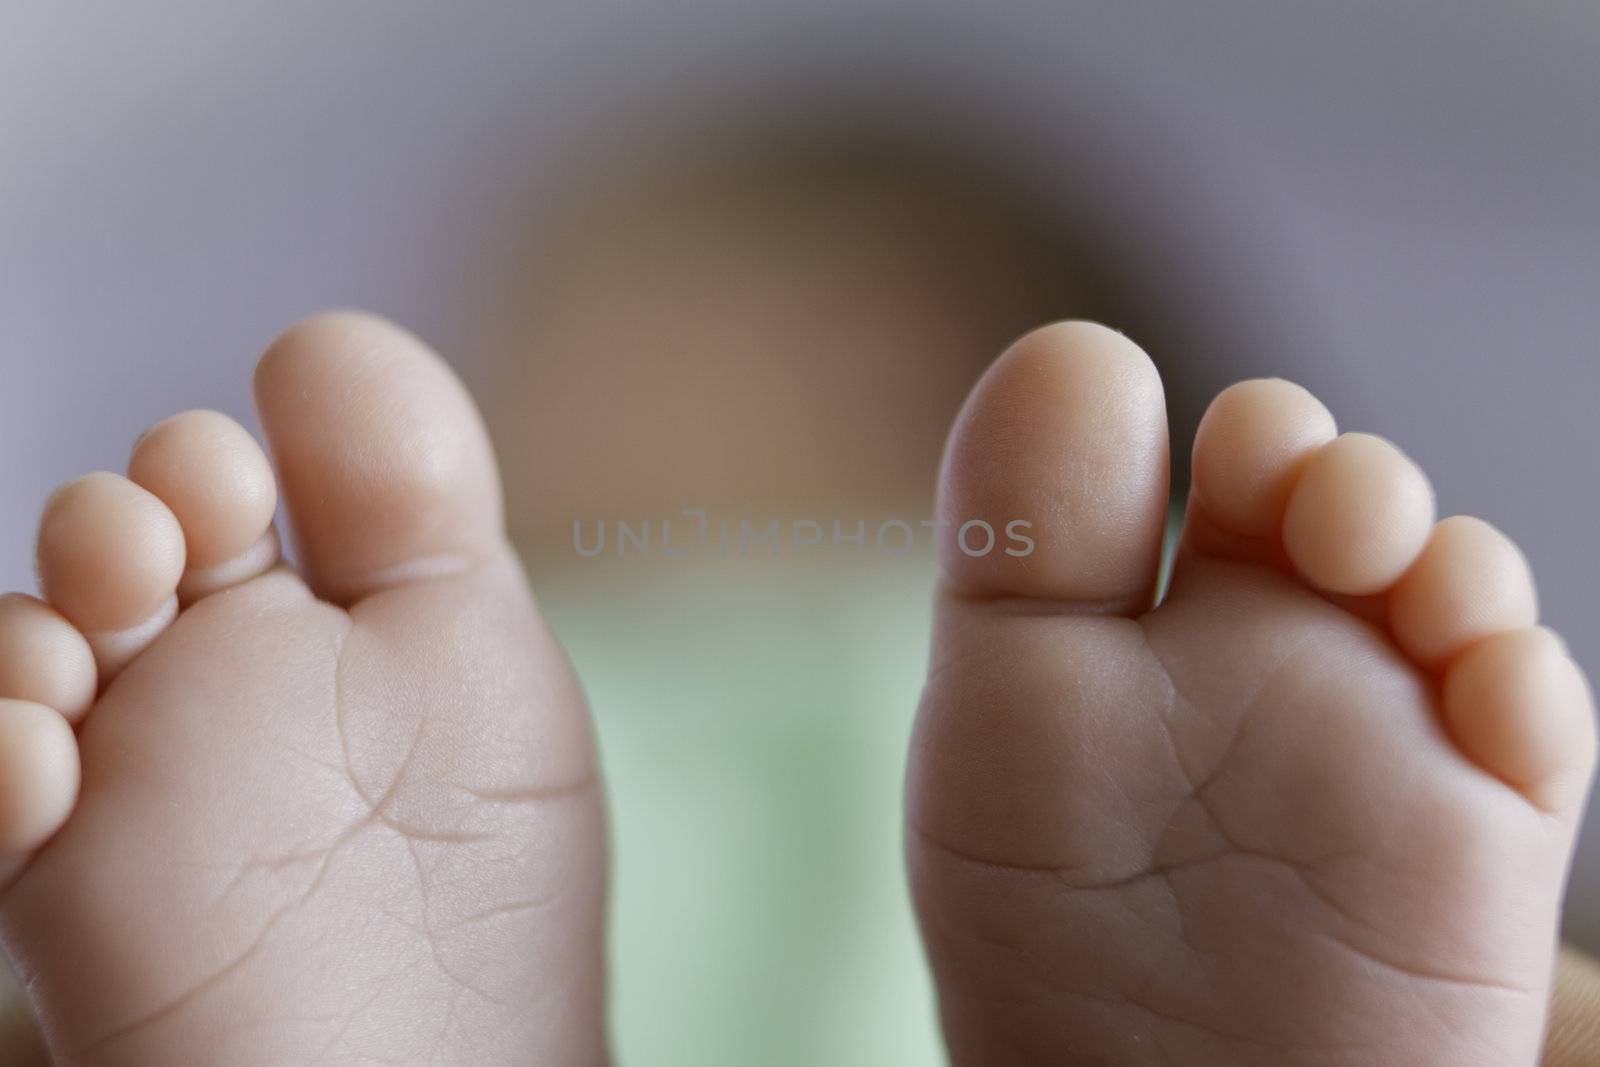 8 days old girl's feet, very tiny toes with shallow depth of field.